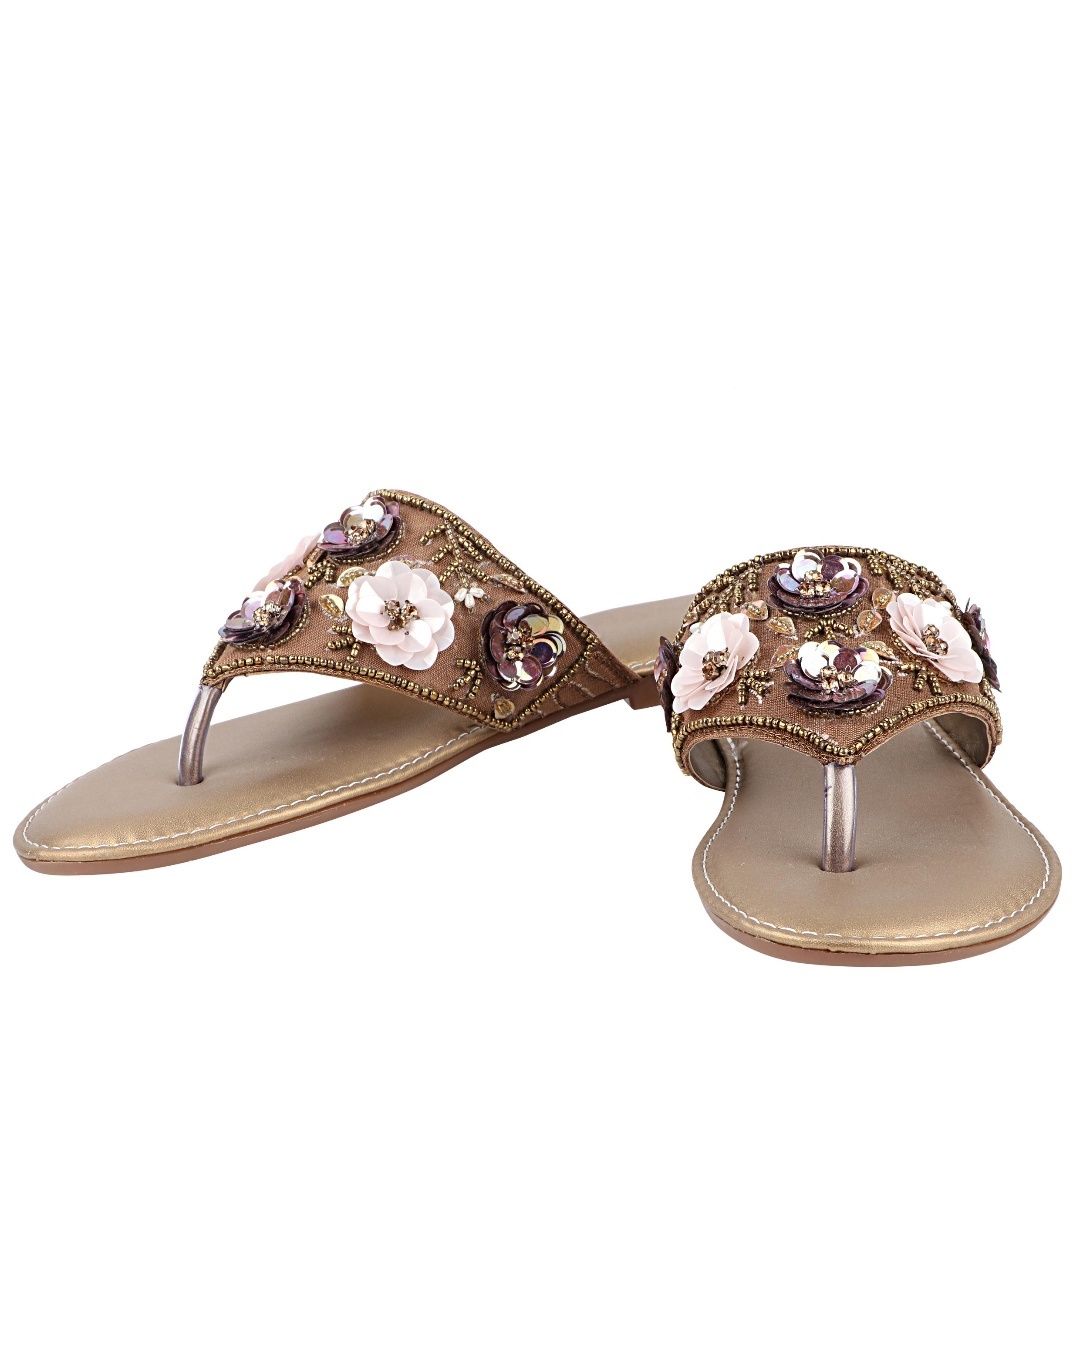 Buy Women's Gold Floral Flare Embellished Flats Online in India at Bewakoof